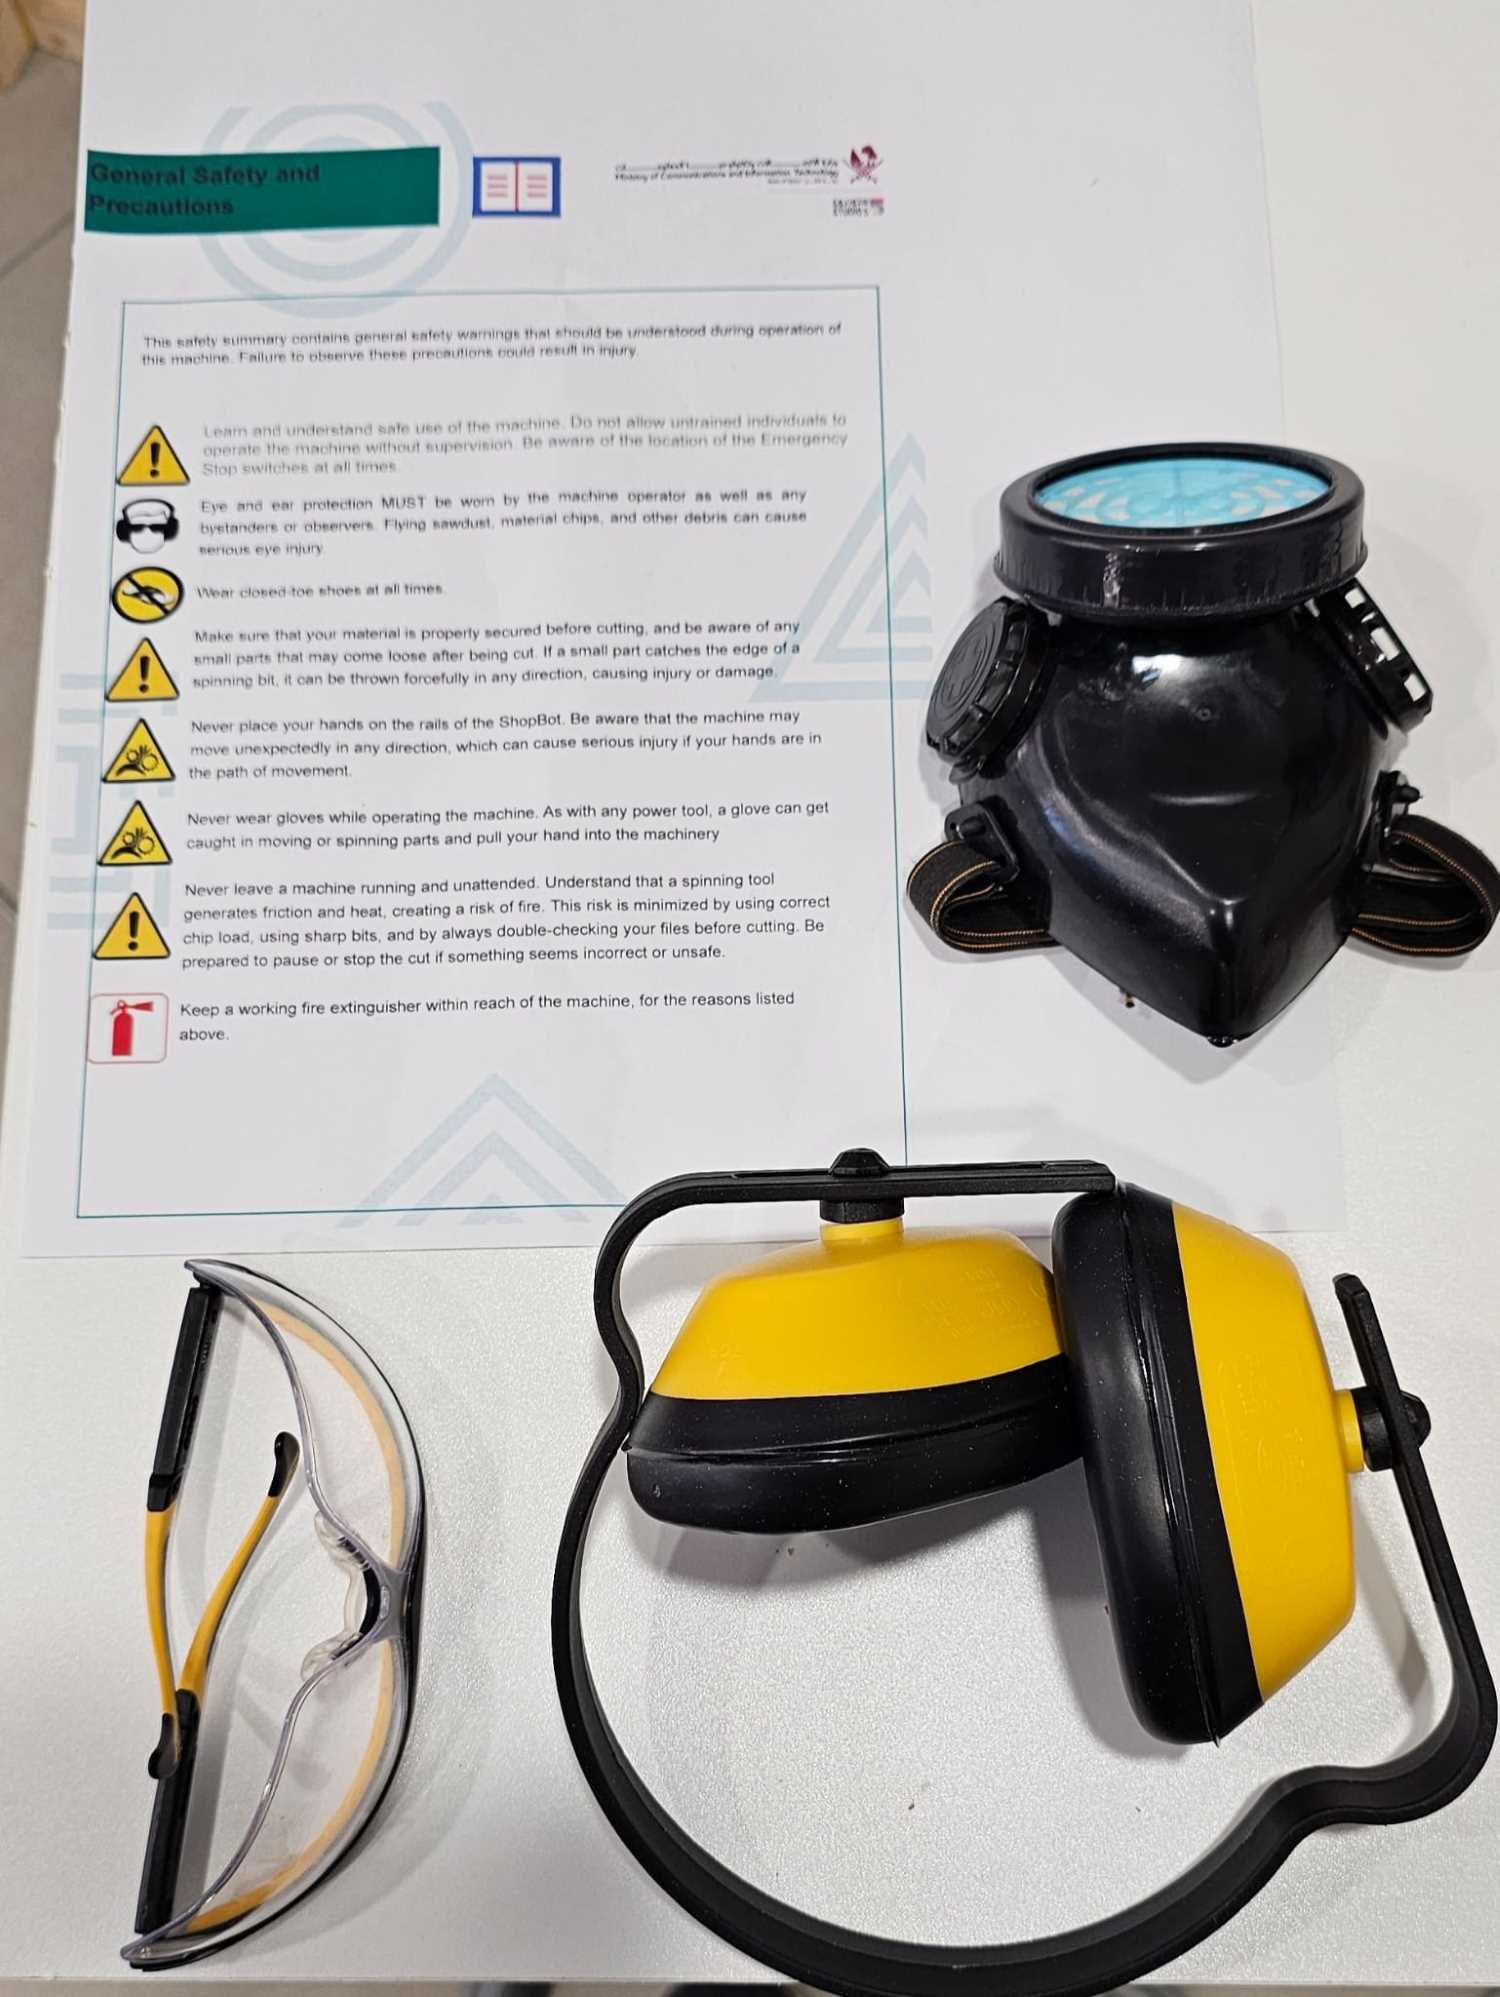 A picture of the PPE used